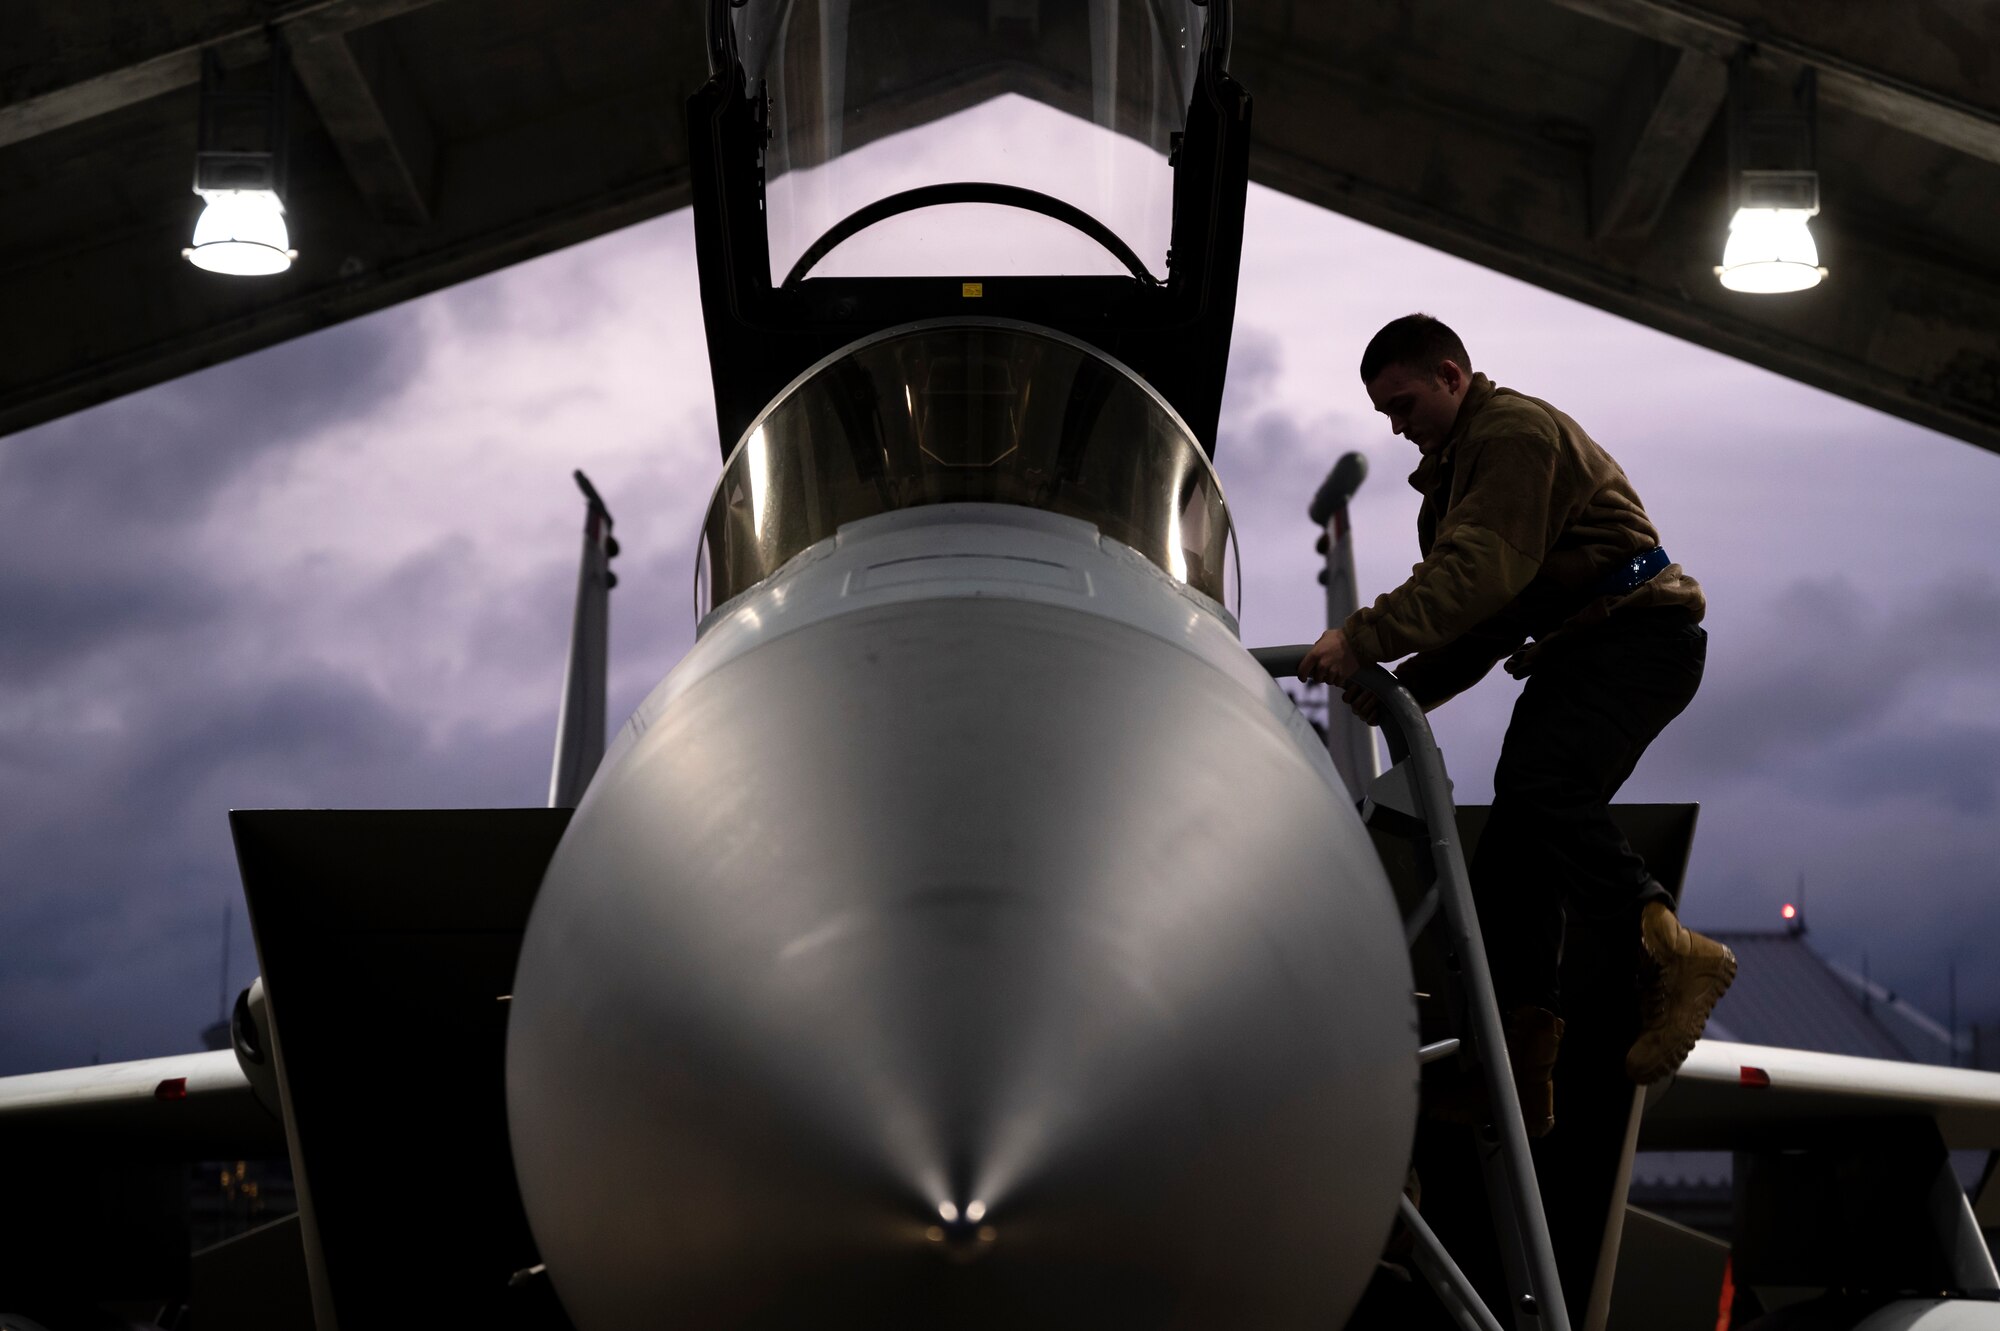 Airman 1st Class Zachary Warren, 44th Aircraft Maintenance Unit crew chief, prepares an F-15C Eagle for departure at Kadena Air Base, Japan, Dec. 1, 2022. The 18th Wing bid farewell to several aircraft during the first part of the Eagles' phased withdrawal. (U.S. Air Force photo by Senior Airman Jessi Roth)